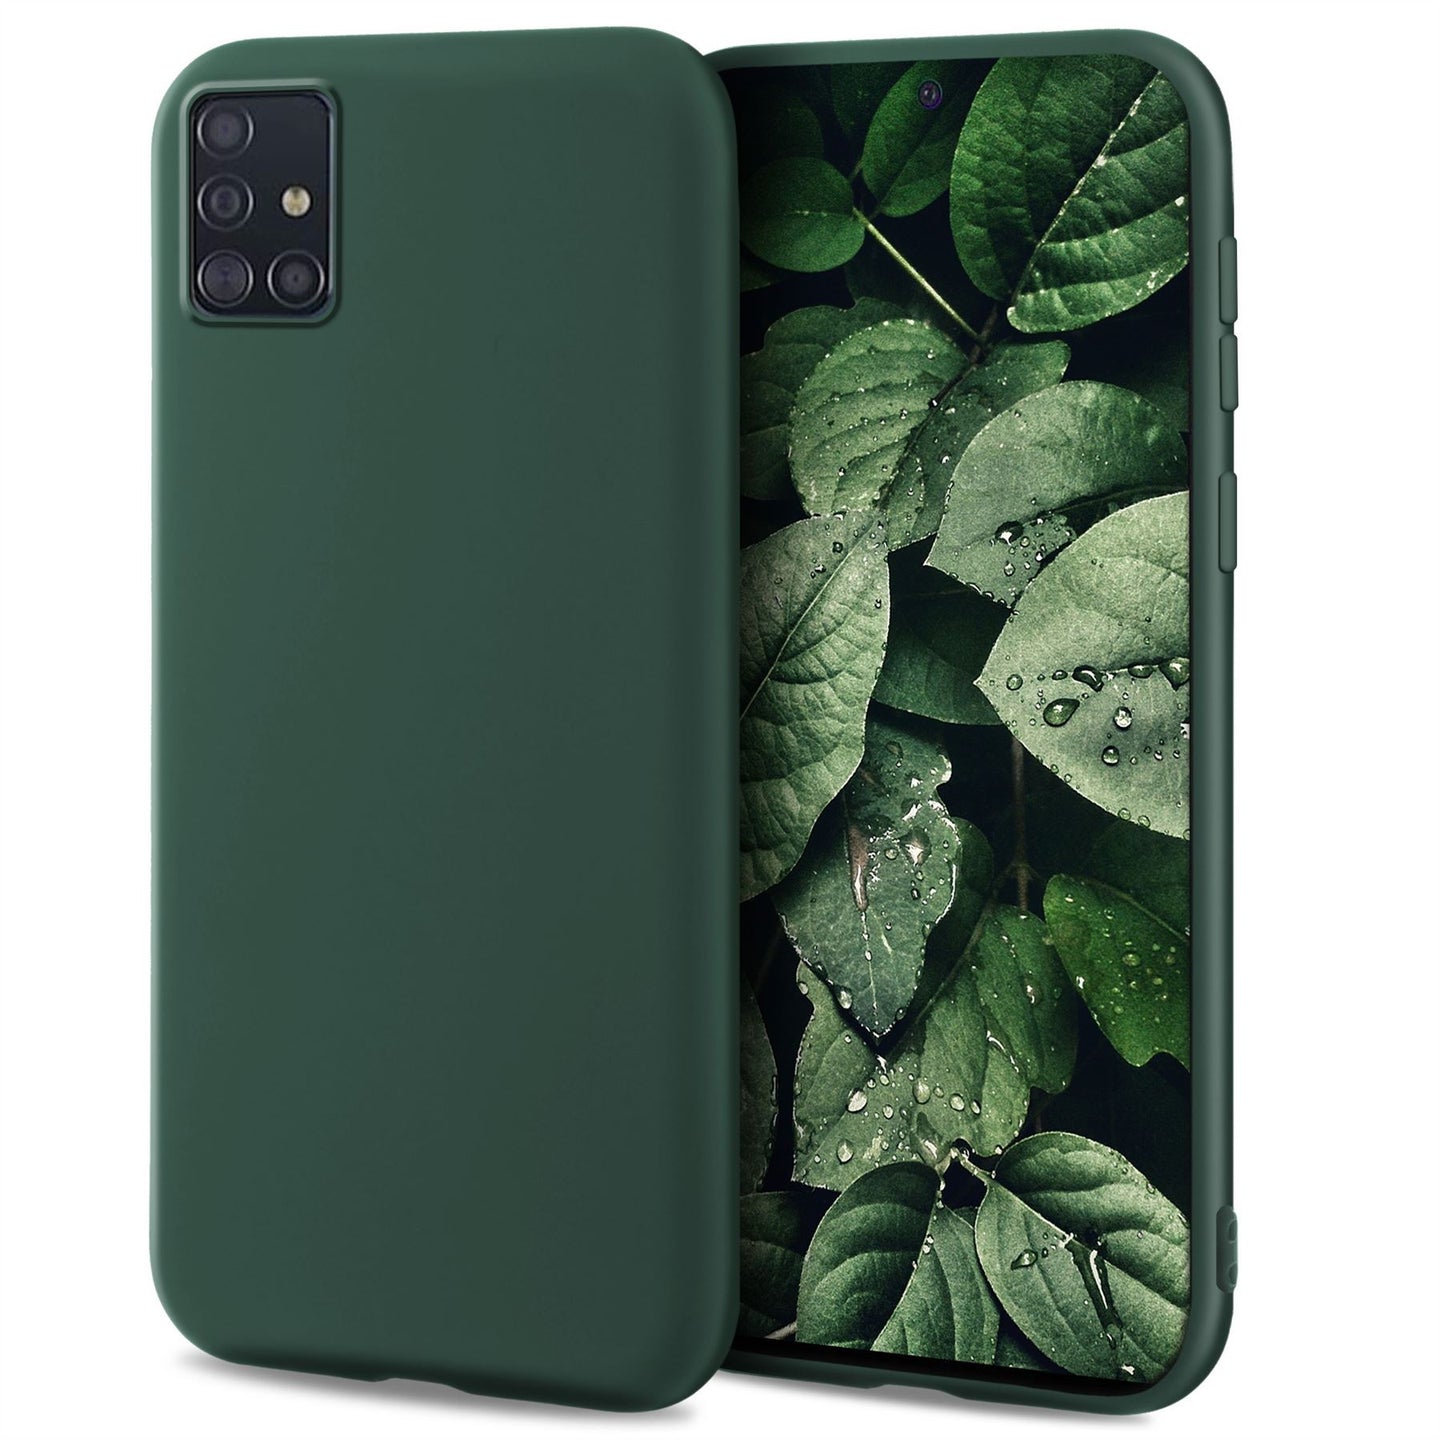 Moozy Minimalist Series Silicone Case for Samsung A51, Midnight Green - Matte Finish Slim Soft TPU Cover